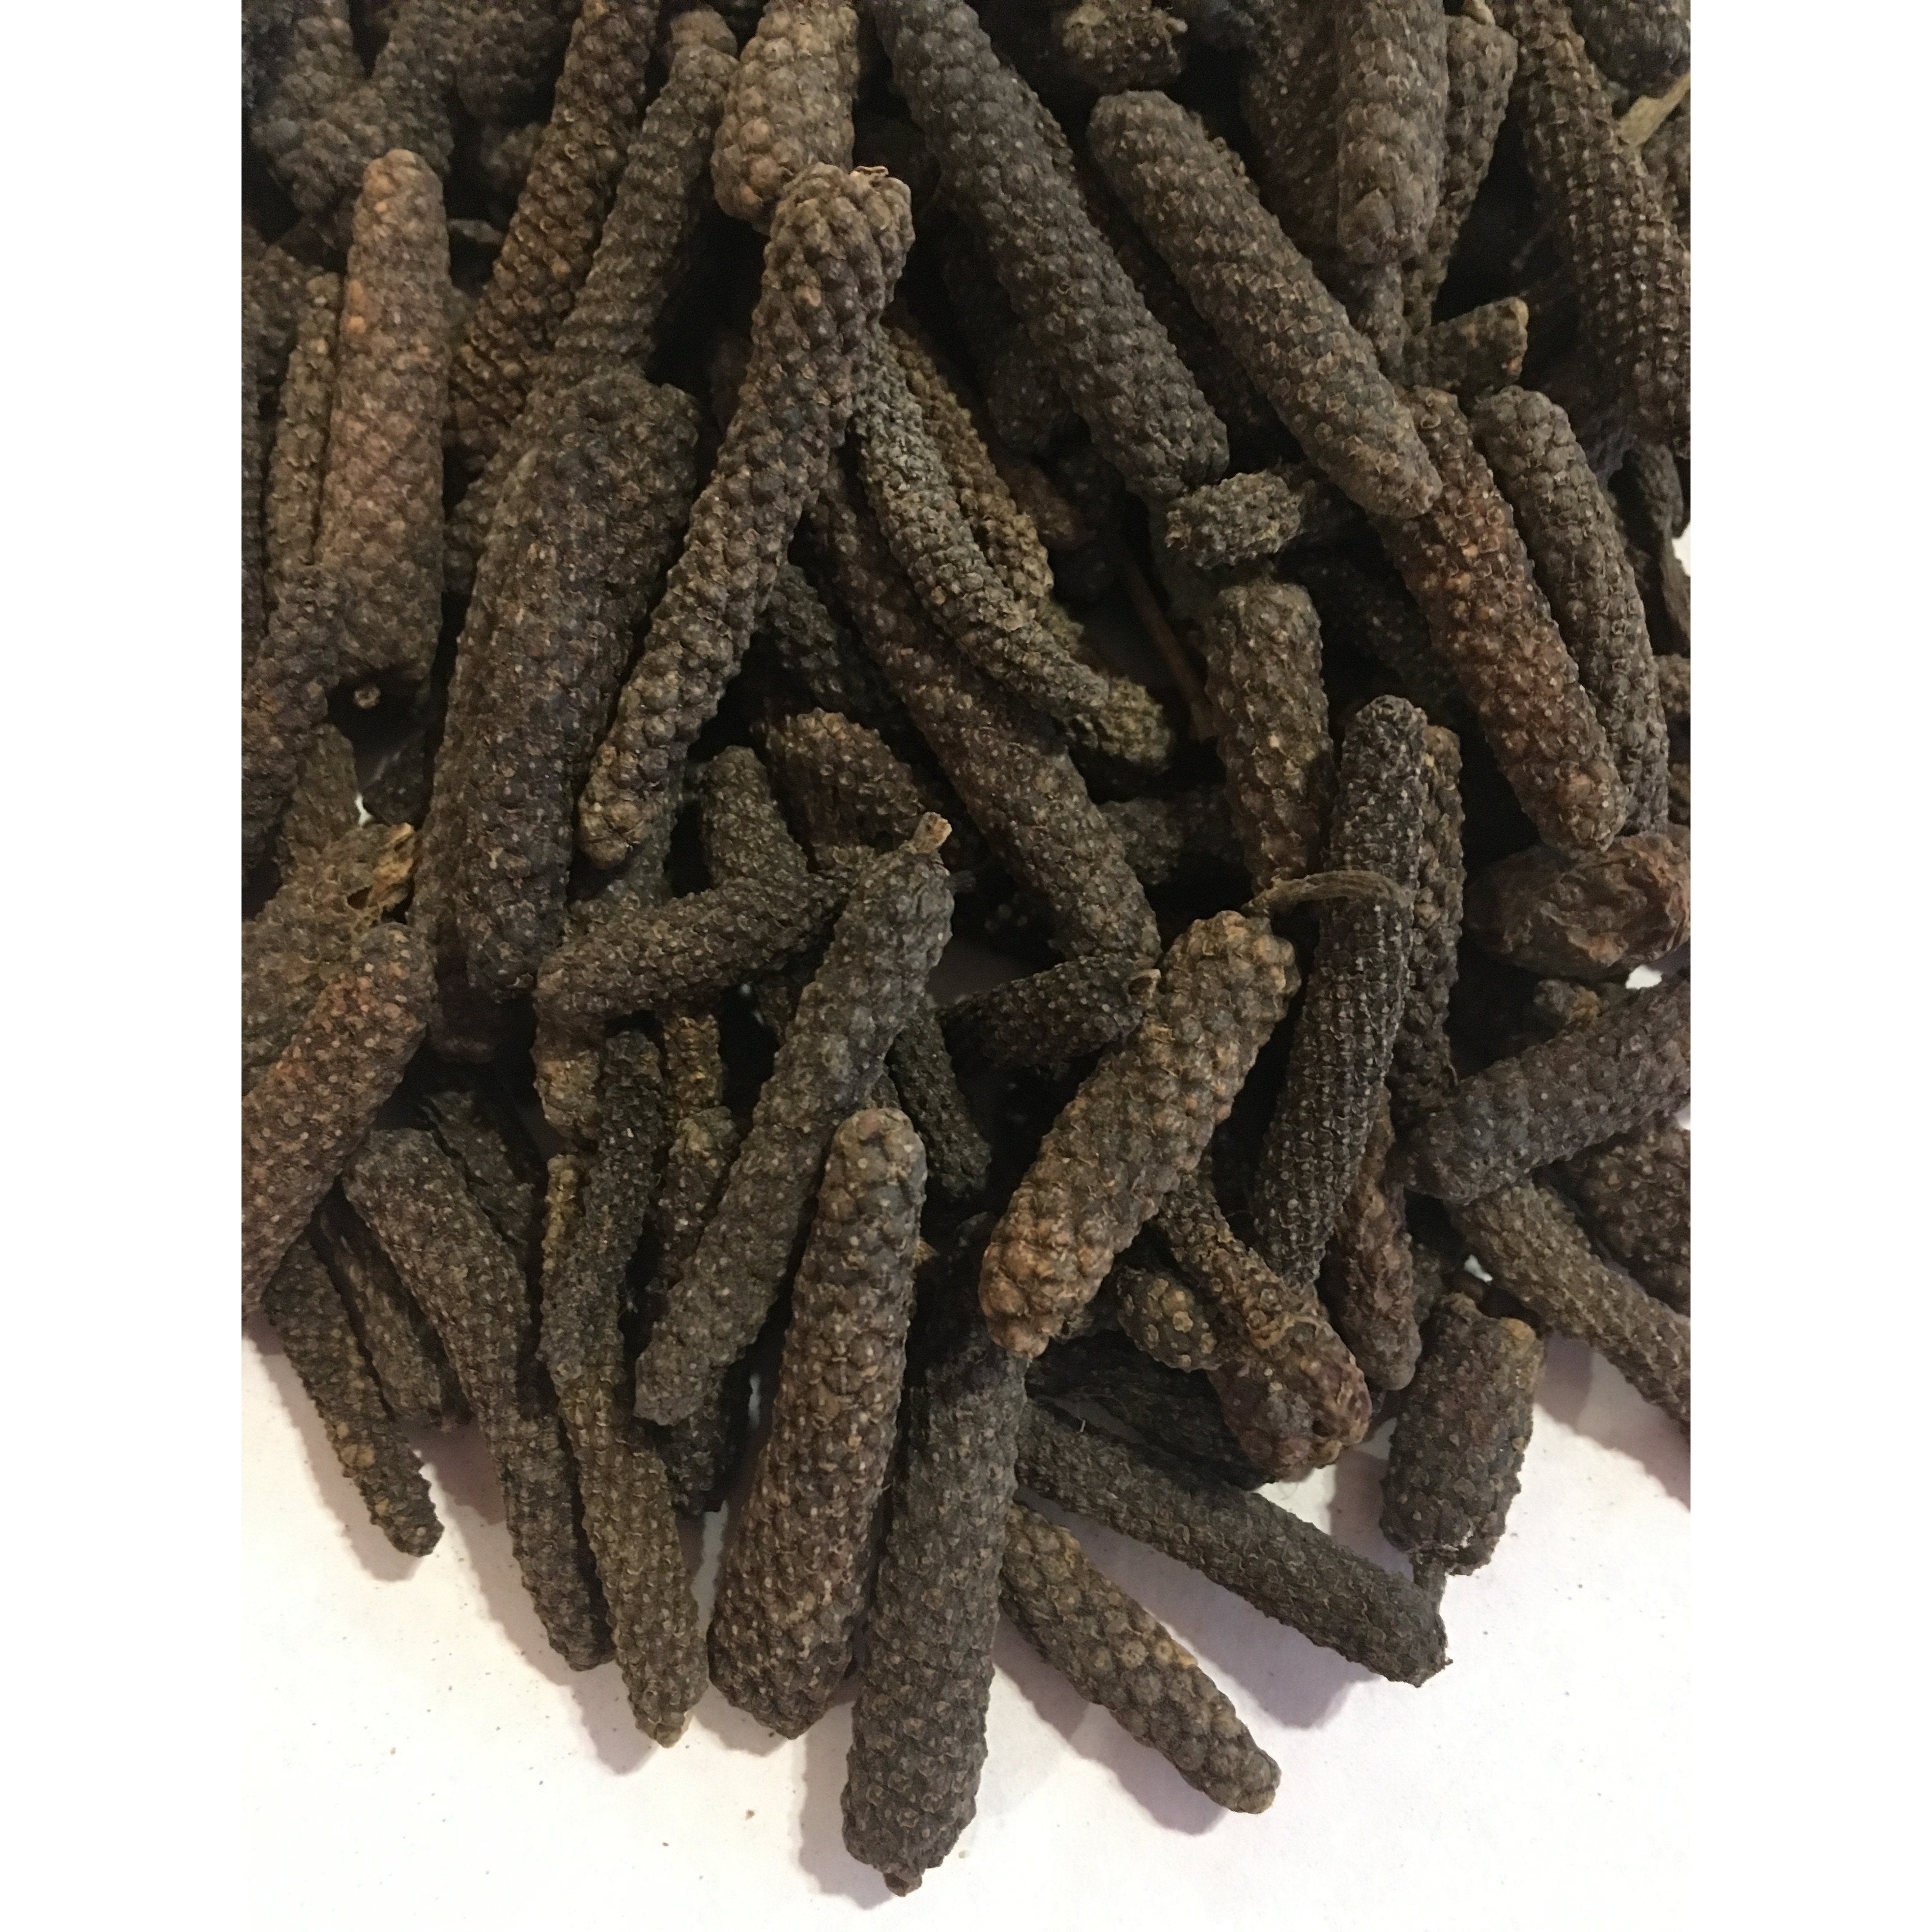 Indian Long Peppers (Piper Longum)